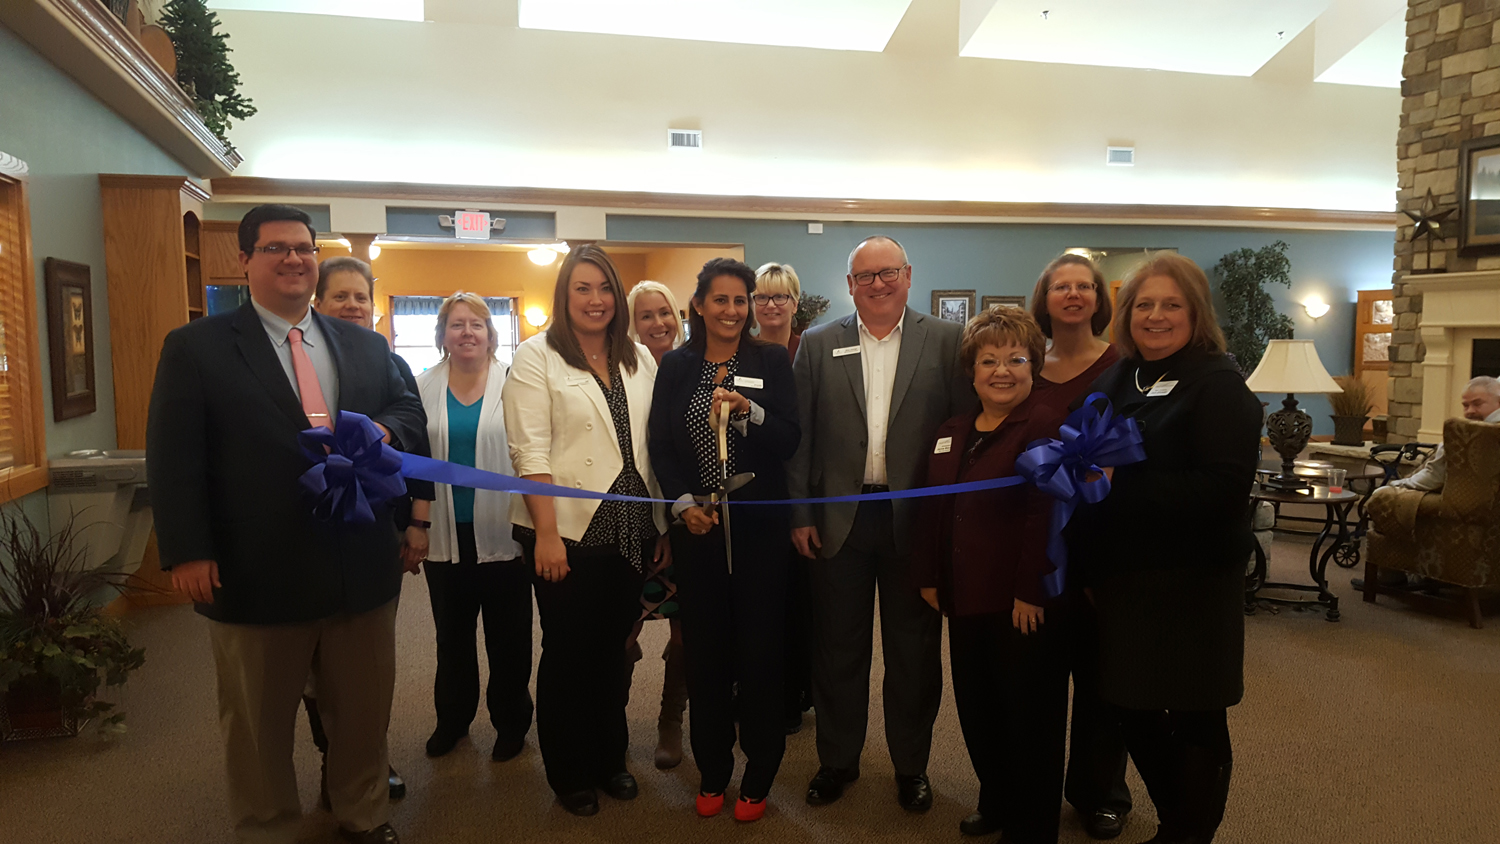 Waterford employees cut the ceremonial ribbon during their open house on Tuesday. (City Times Photo)